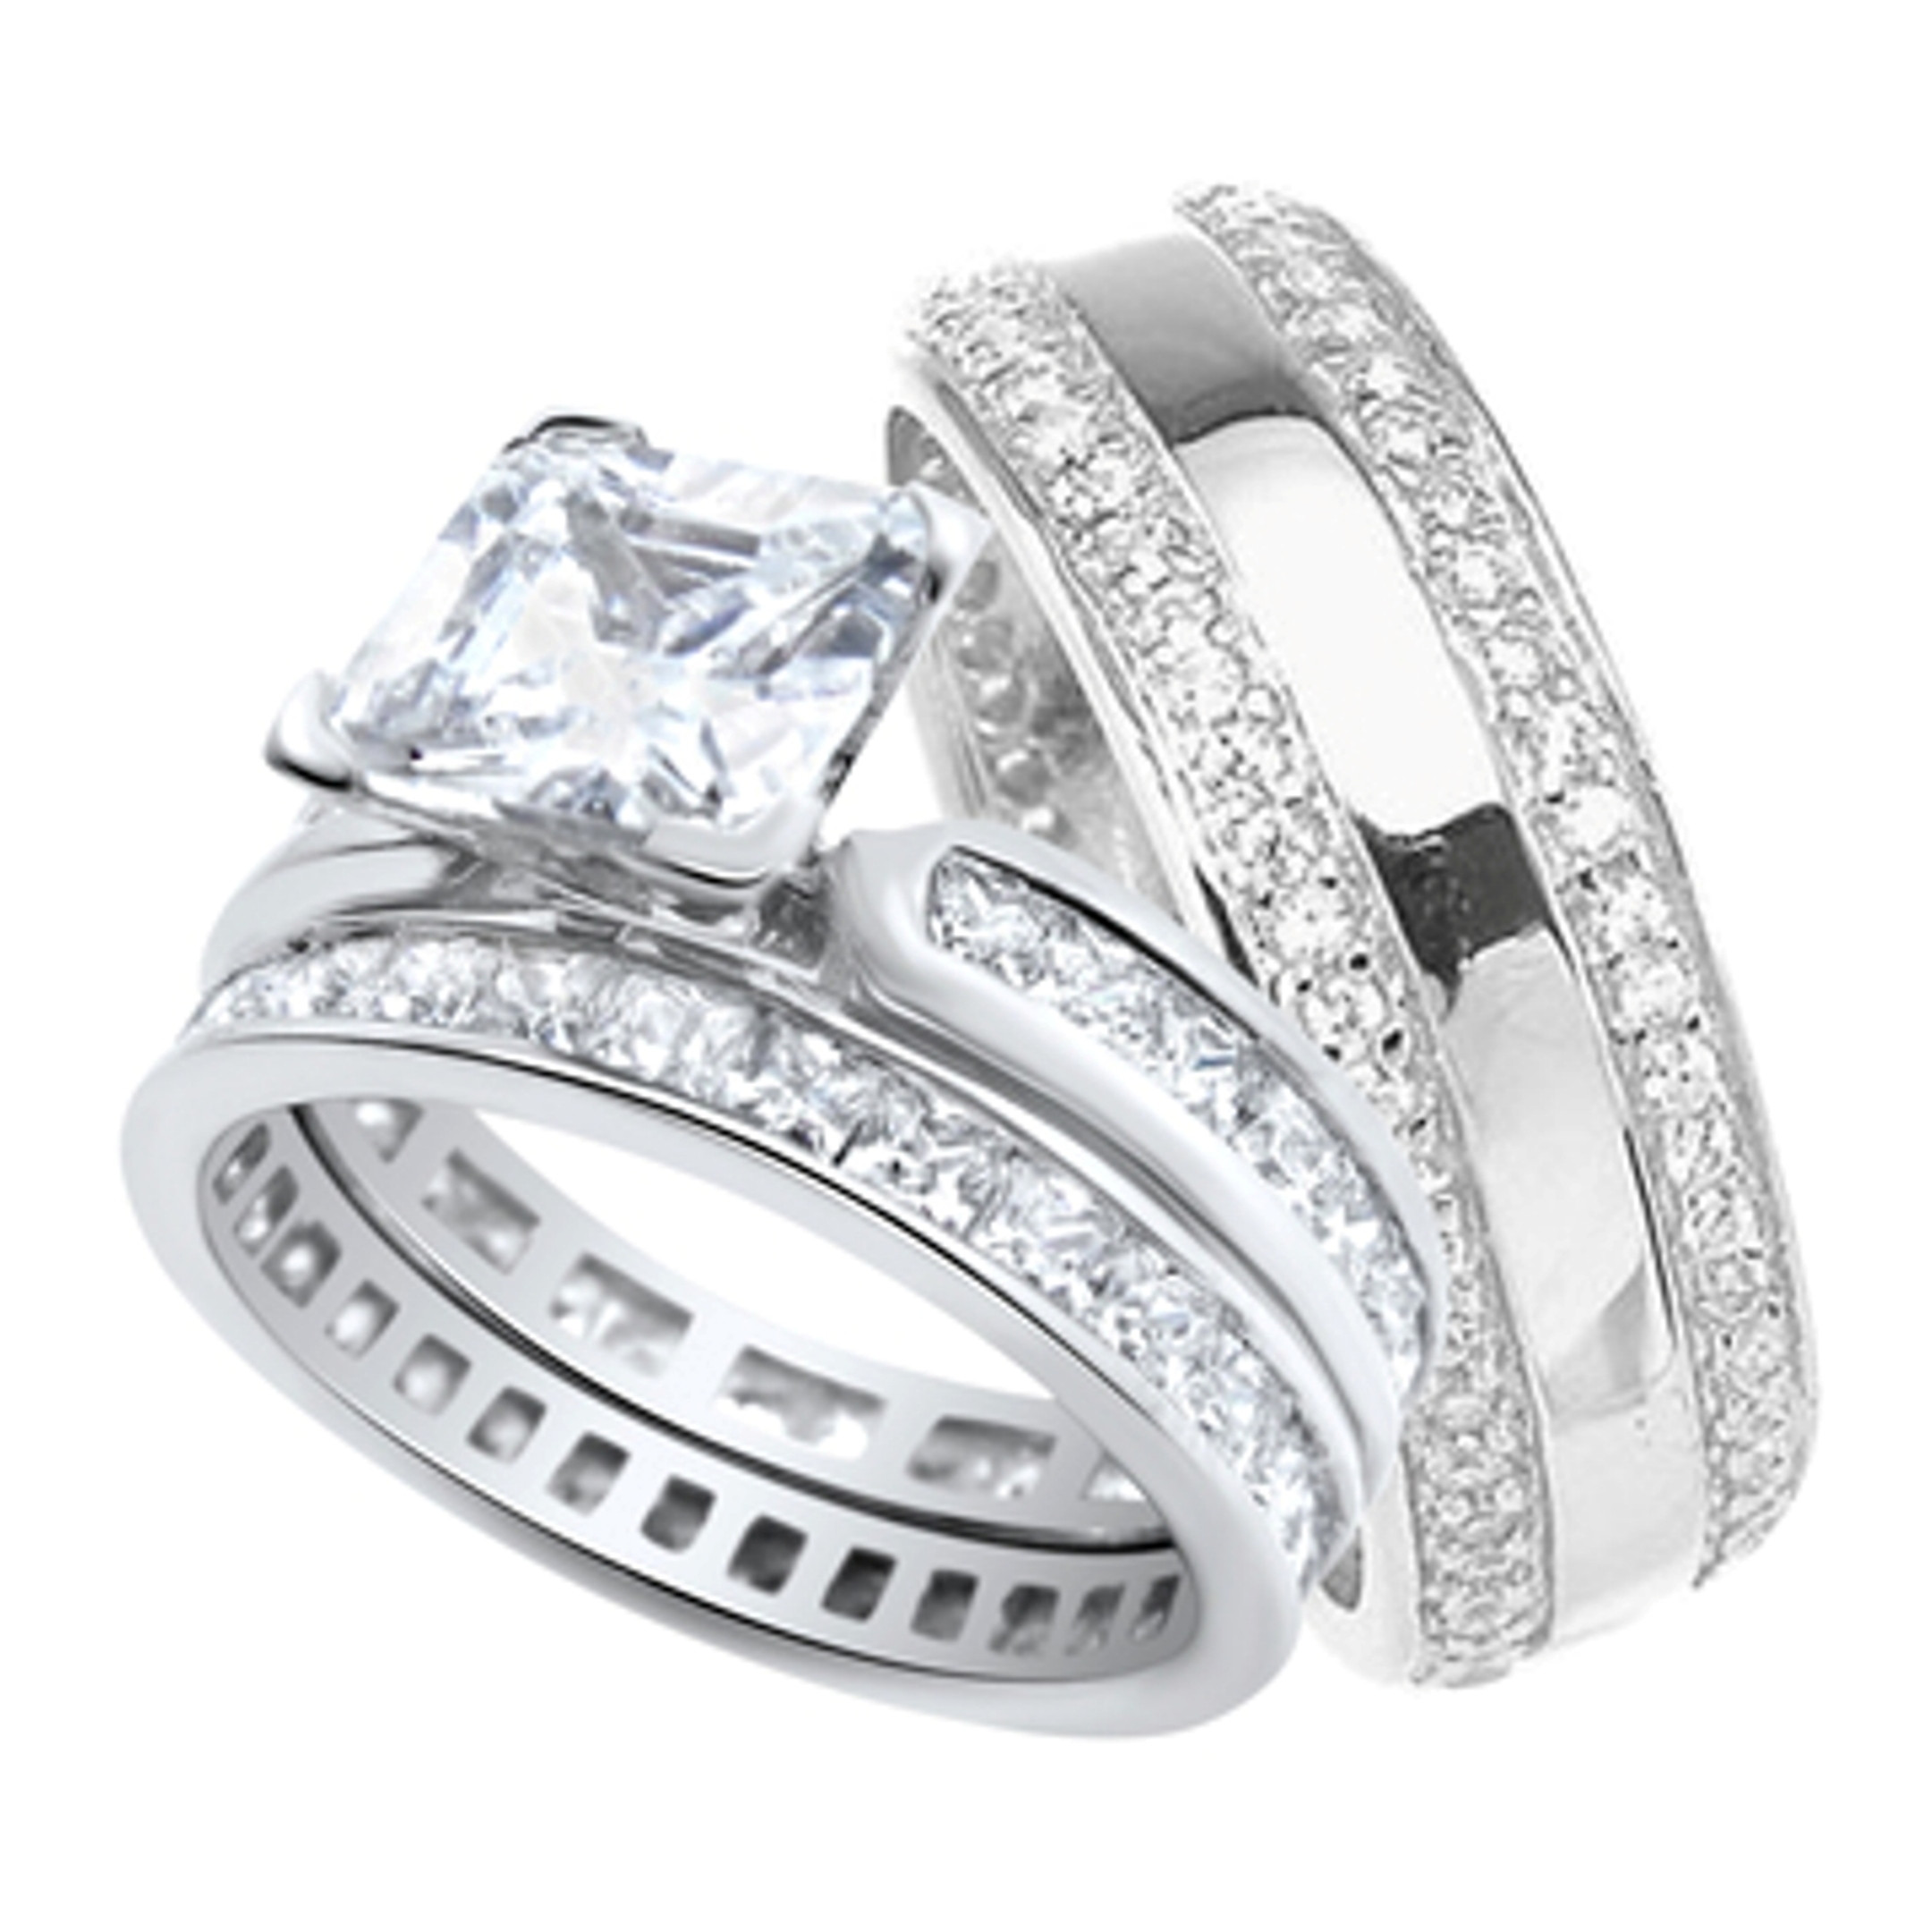 Walmart Wedding Rings For Him
 His and Hers Wedding Ring Set Matching Sterling Silver